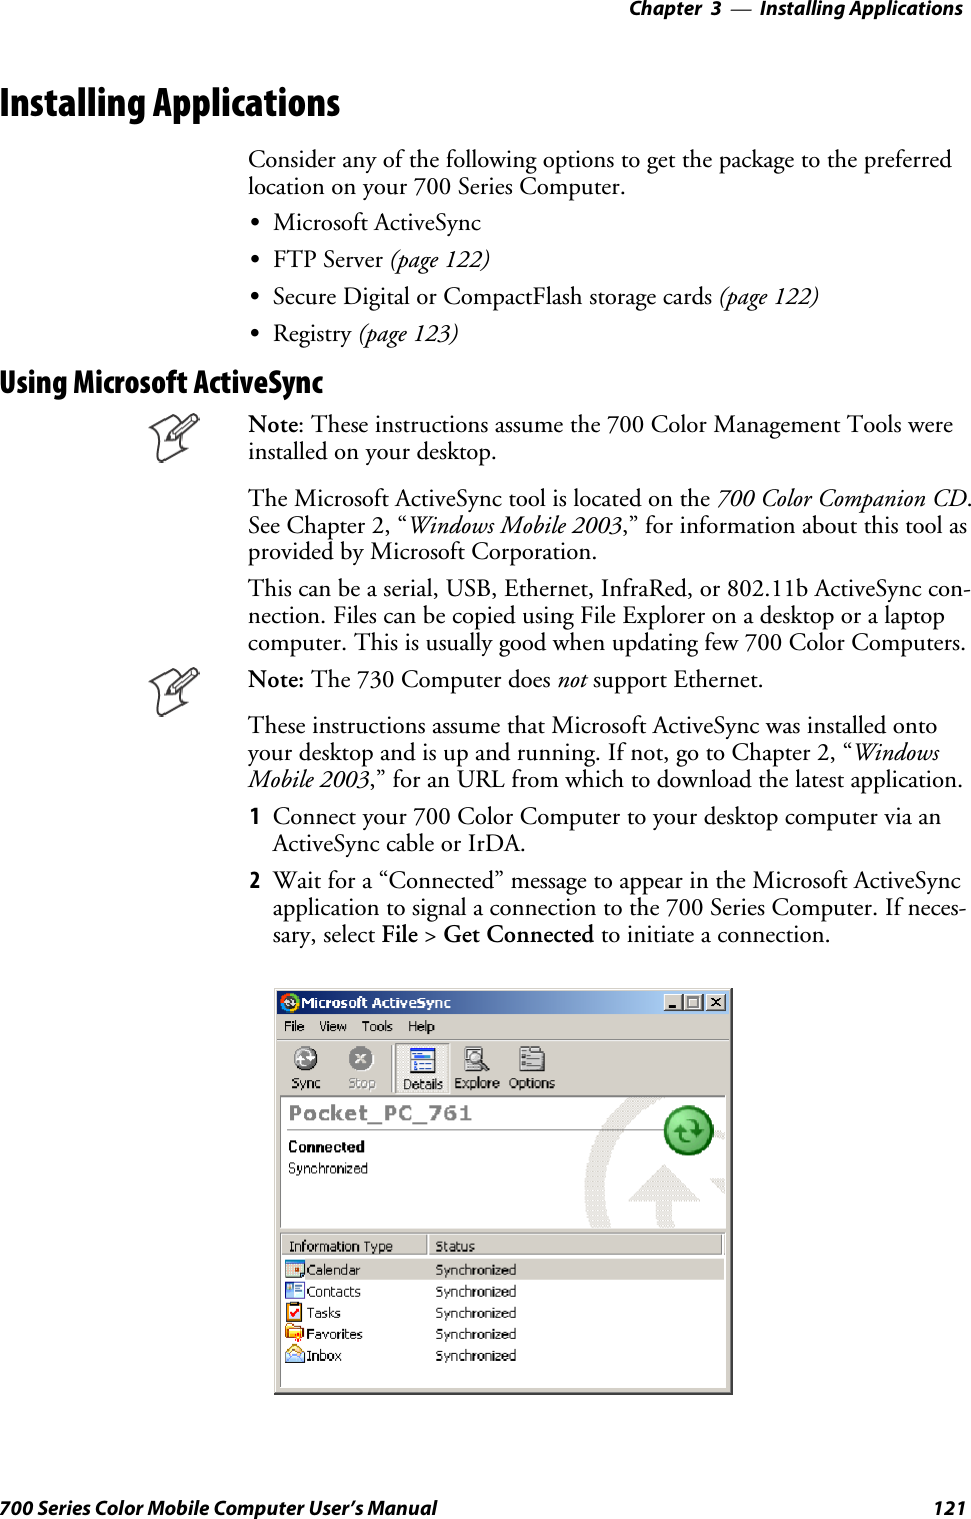 Installing Applications—Chapter 3121700 Series Color Mobile Computer User’s ManualInstalling ApplicationsConsider any of the following options to get the package to the preferredlocation on your 700 Series Computer.SMicrosoft ActiveSyncSFTP Server (page 122)SSecure Digital or CompactFlash storage cards (page 122)SRegistry (page 123)Using Microsoft ActiveSyncNote: These instructions assume the 700 Color Management Tools wereinstalled on your desktop.The Microsoft ActiveSync tool is located on the 700 Color Companion CD.See Chapter 2, “Windows Mobile 2003,” for information about this tool asprovided by Microsoft Corporation.This can be a serial, USB, Ethernet, InfraRed, or 802.11b ActiveSync con-nection. Files can be copied using File Explorer on a desktop or a laptopcomputer. This is usually good when updating few 700 Color Computers.Note: The 730 Computer does not support Ethernet.These instructions assume that Microsoft ActiveSync was installed ontoyour desktop and is up and running. If not, go to Chapter 2, “WindowsMobile 2003,” for an URL from which to download the latest application.1Connectyour700ColorComputertoyourdesktopcomputerviaanActiveSync cable or IrDA.2Wait for a “Connected” message to appear in the Microsoft ActiveSyncapplication to signal a connection to the 700 Series Computer. If neces-sary, select File &gt;Get Connected to initiate a connection.